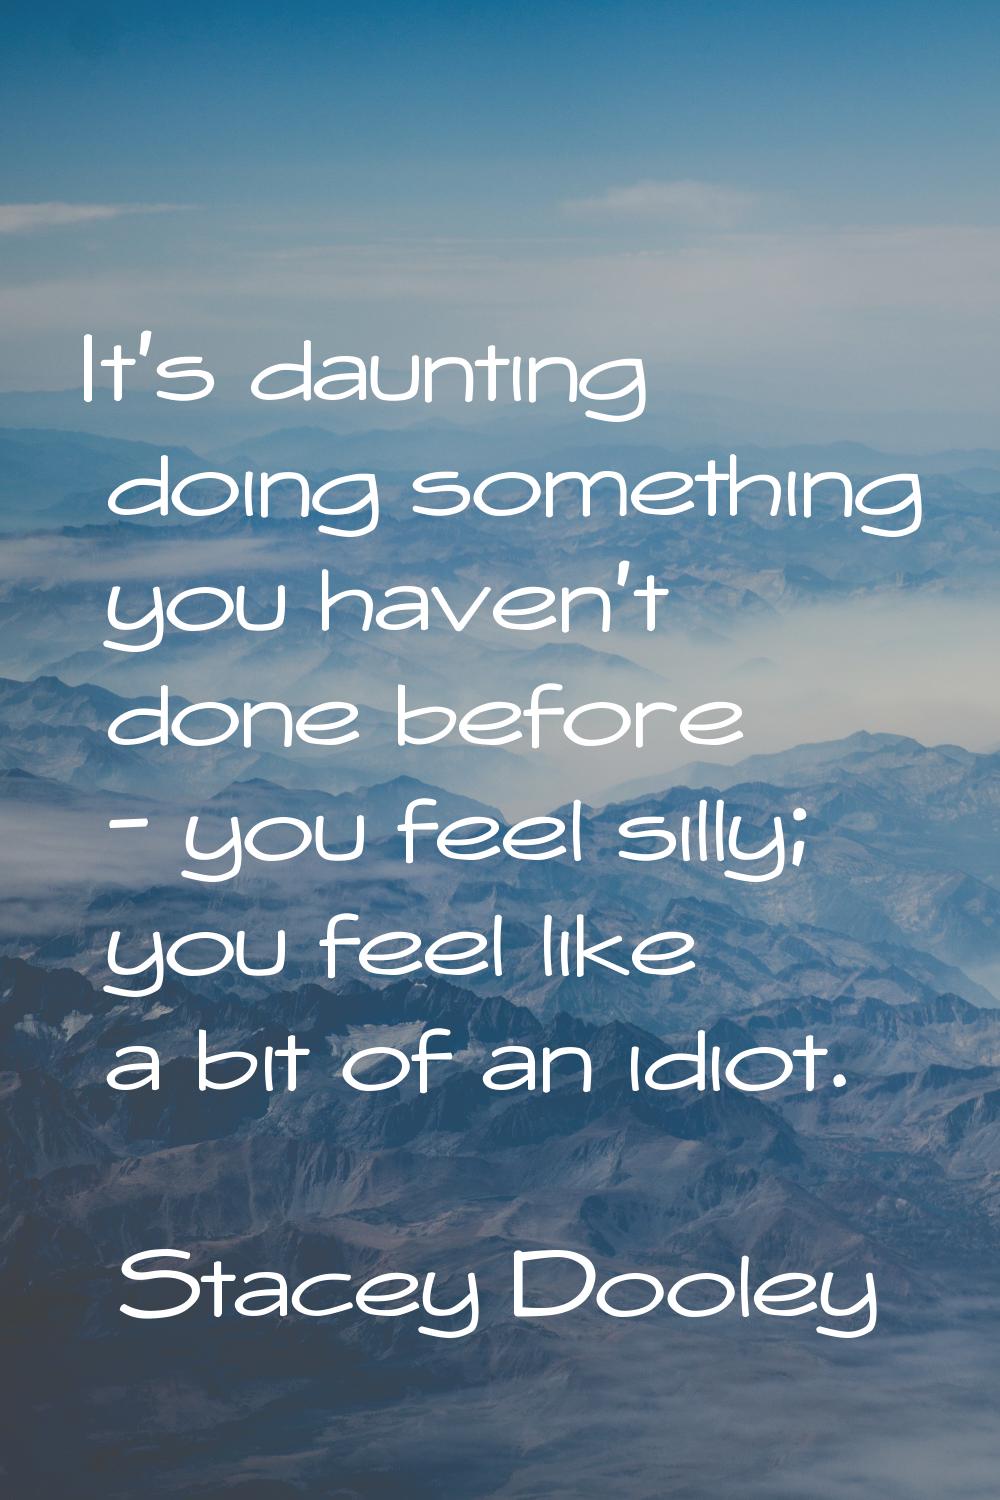 It's daunting doing something you haven't done before - you feel silly; you feel like a bit of an i